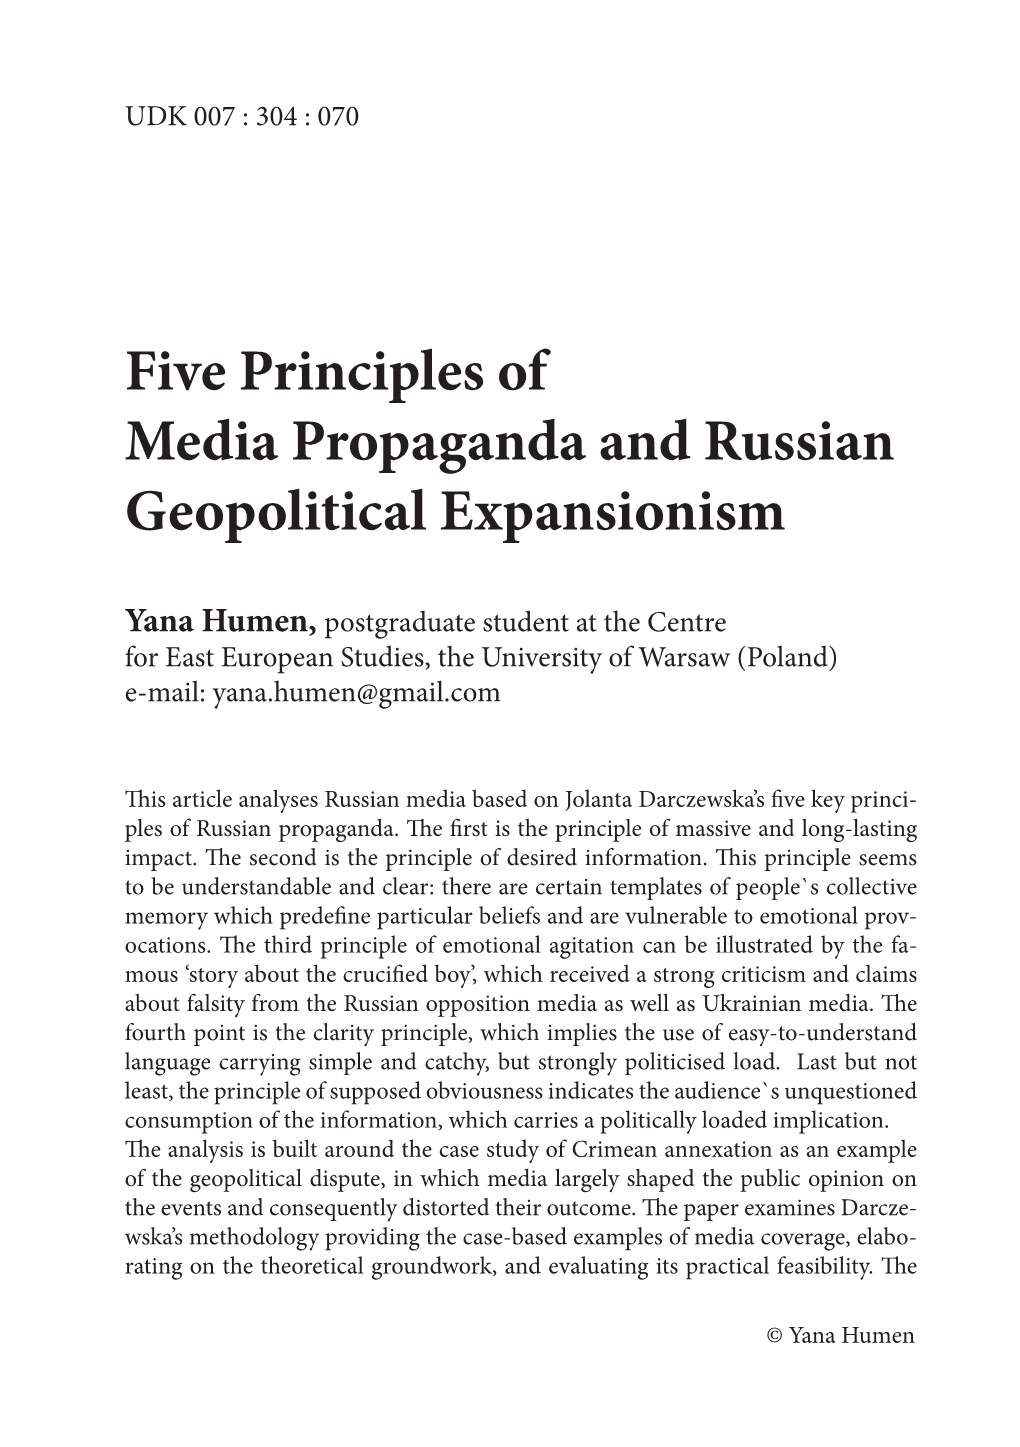 Five Principles of Media Propaganda and Russian Geopolitical Expansionism